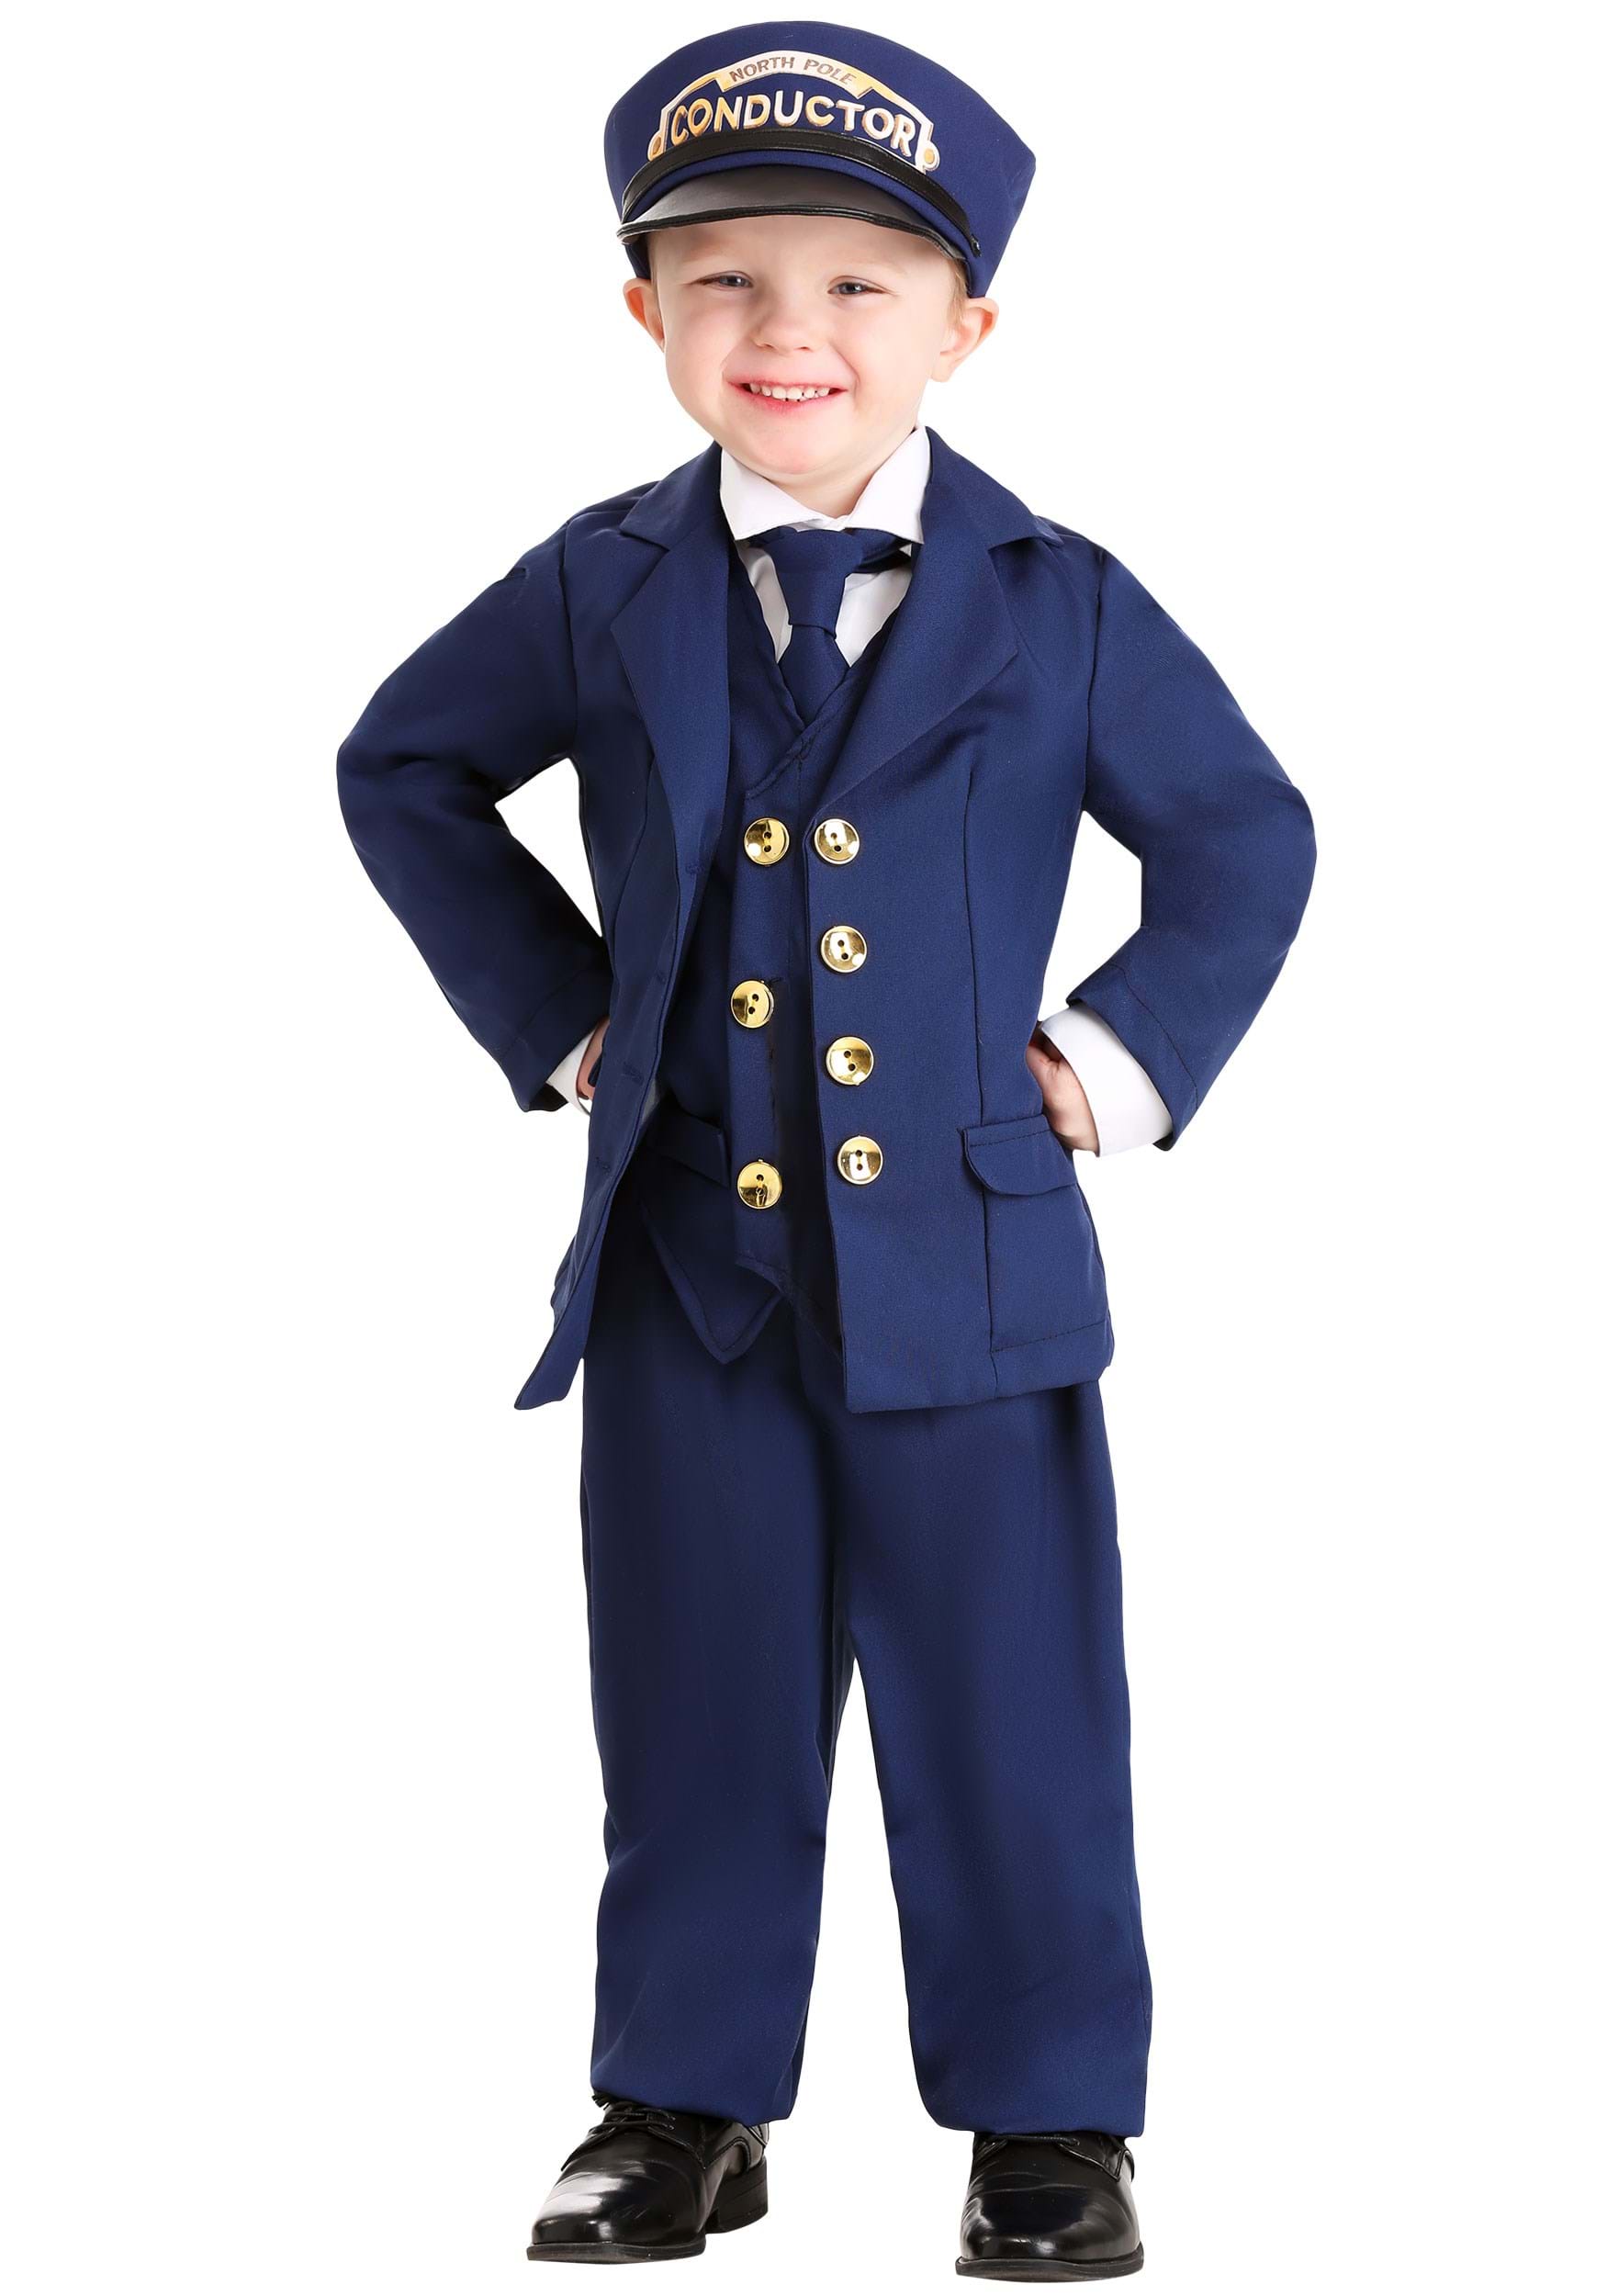 Photos - Fancy Dress North FUN Costumes  Pole Train Conductor Costume for Toddlers Blue/Whit 